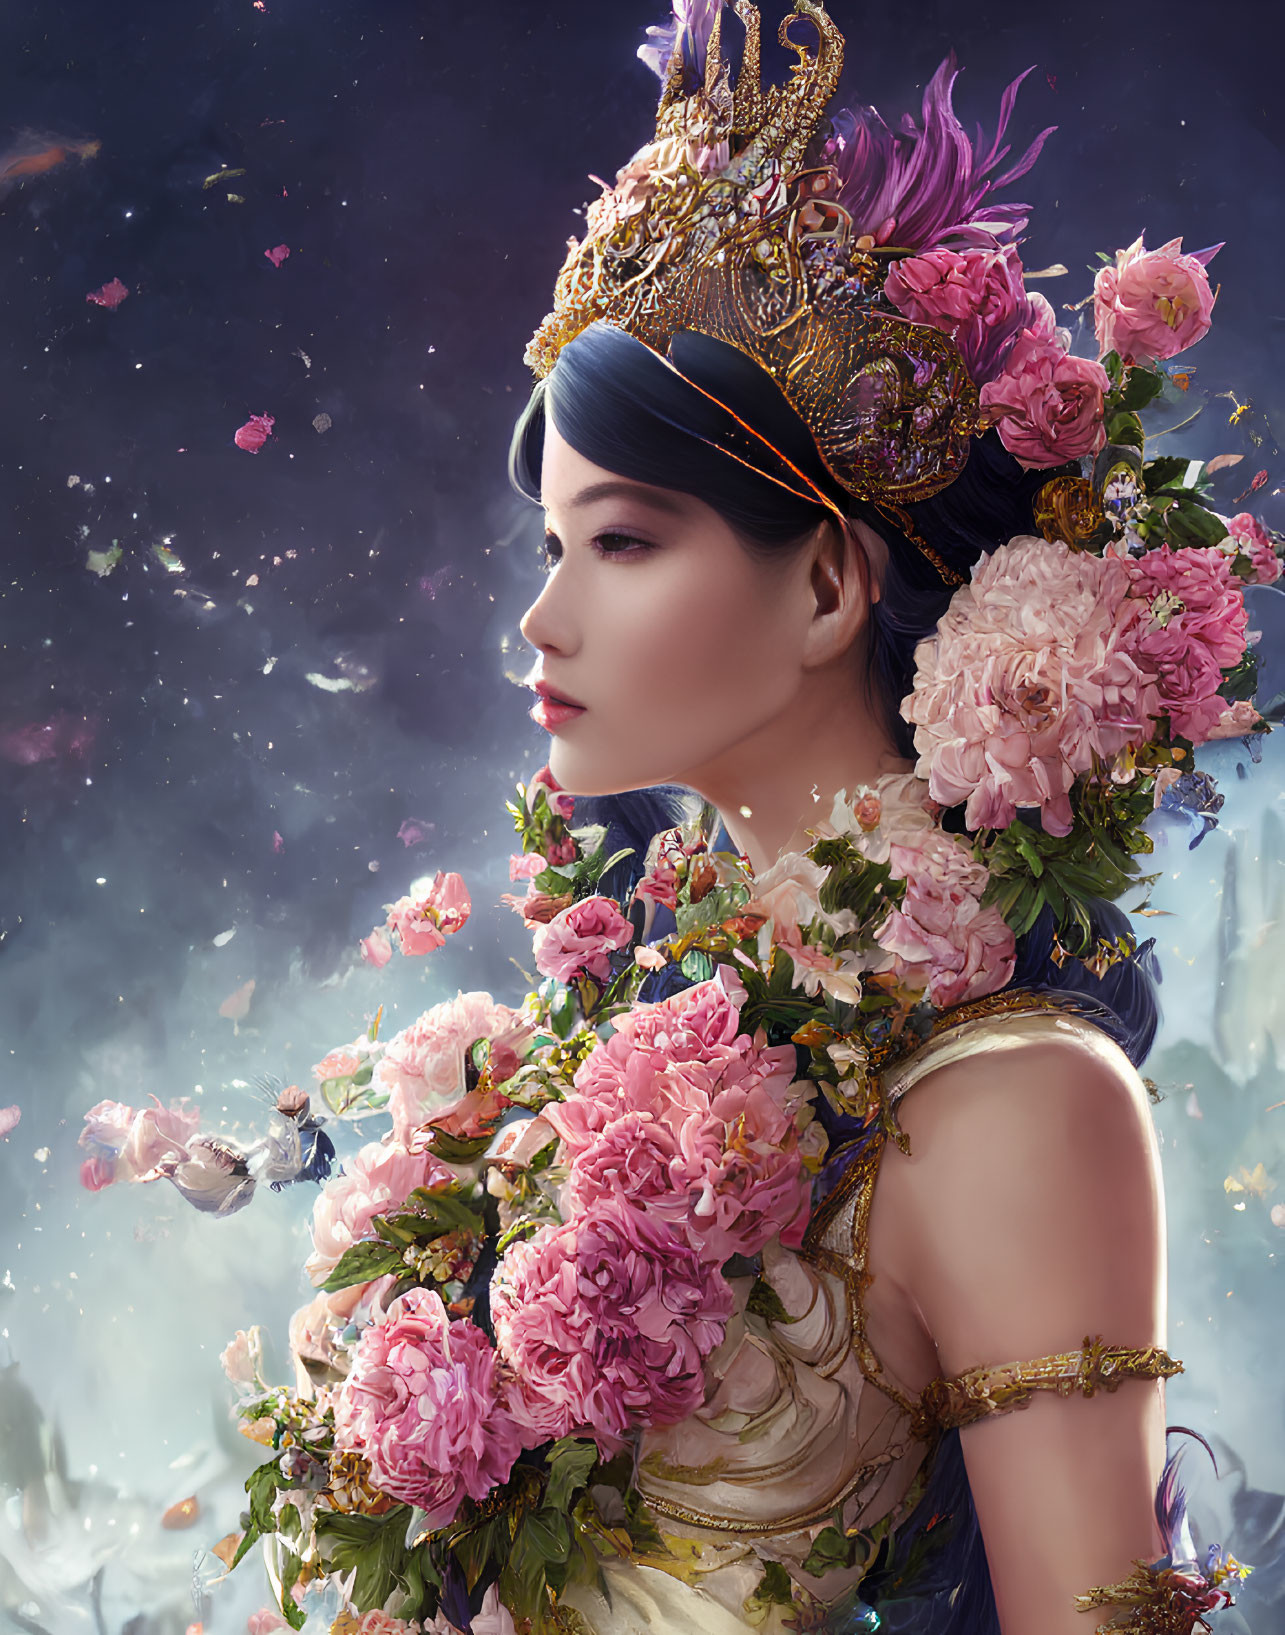 Woman with ornate headdress and pink roses in celestial setting